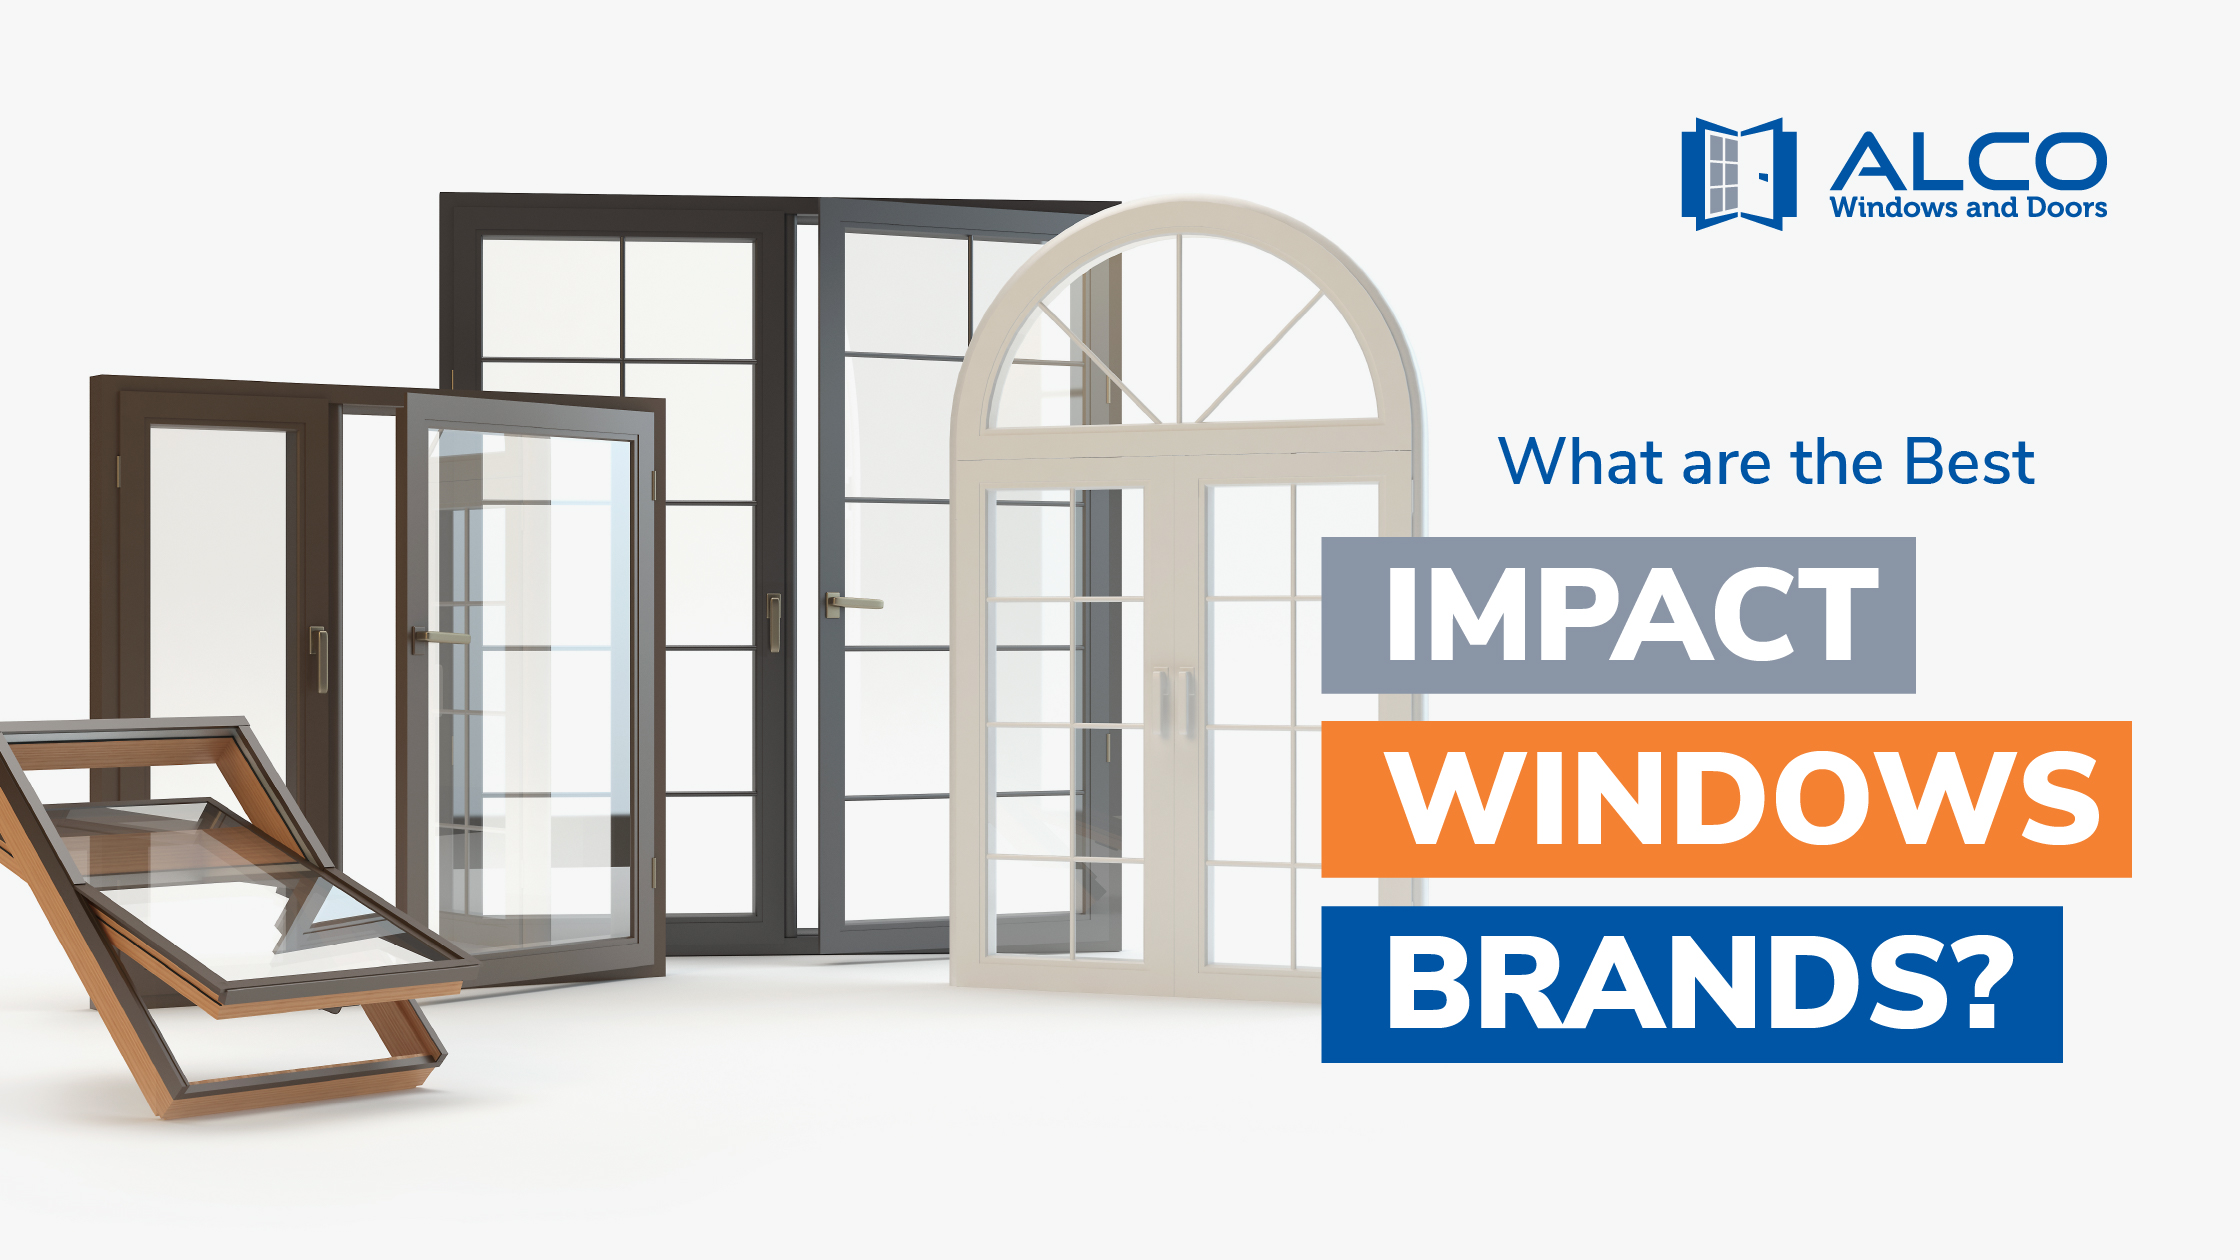 What are the Best Impact Window Brands?